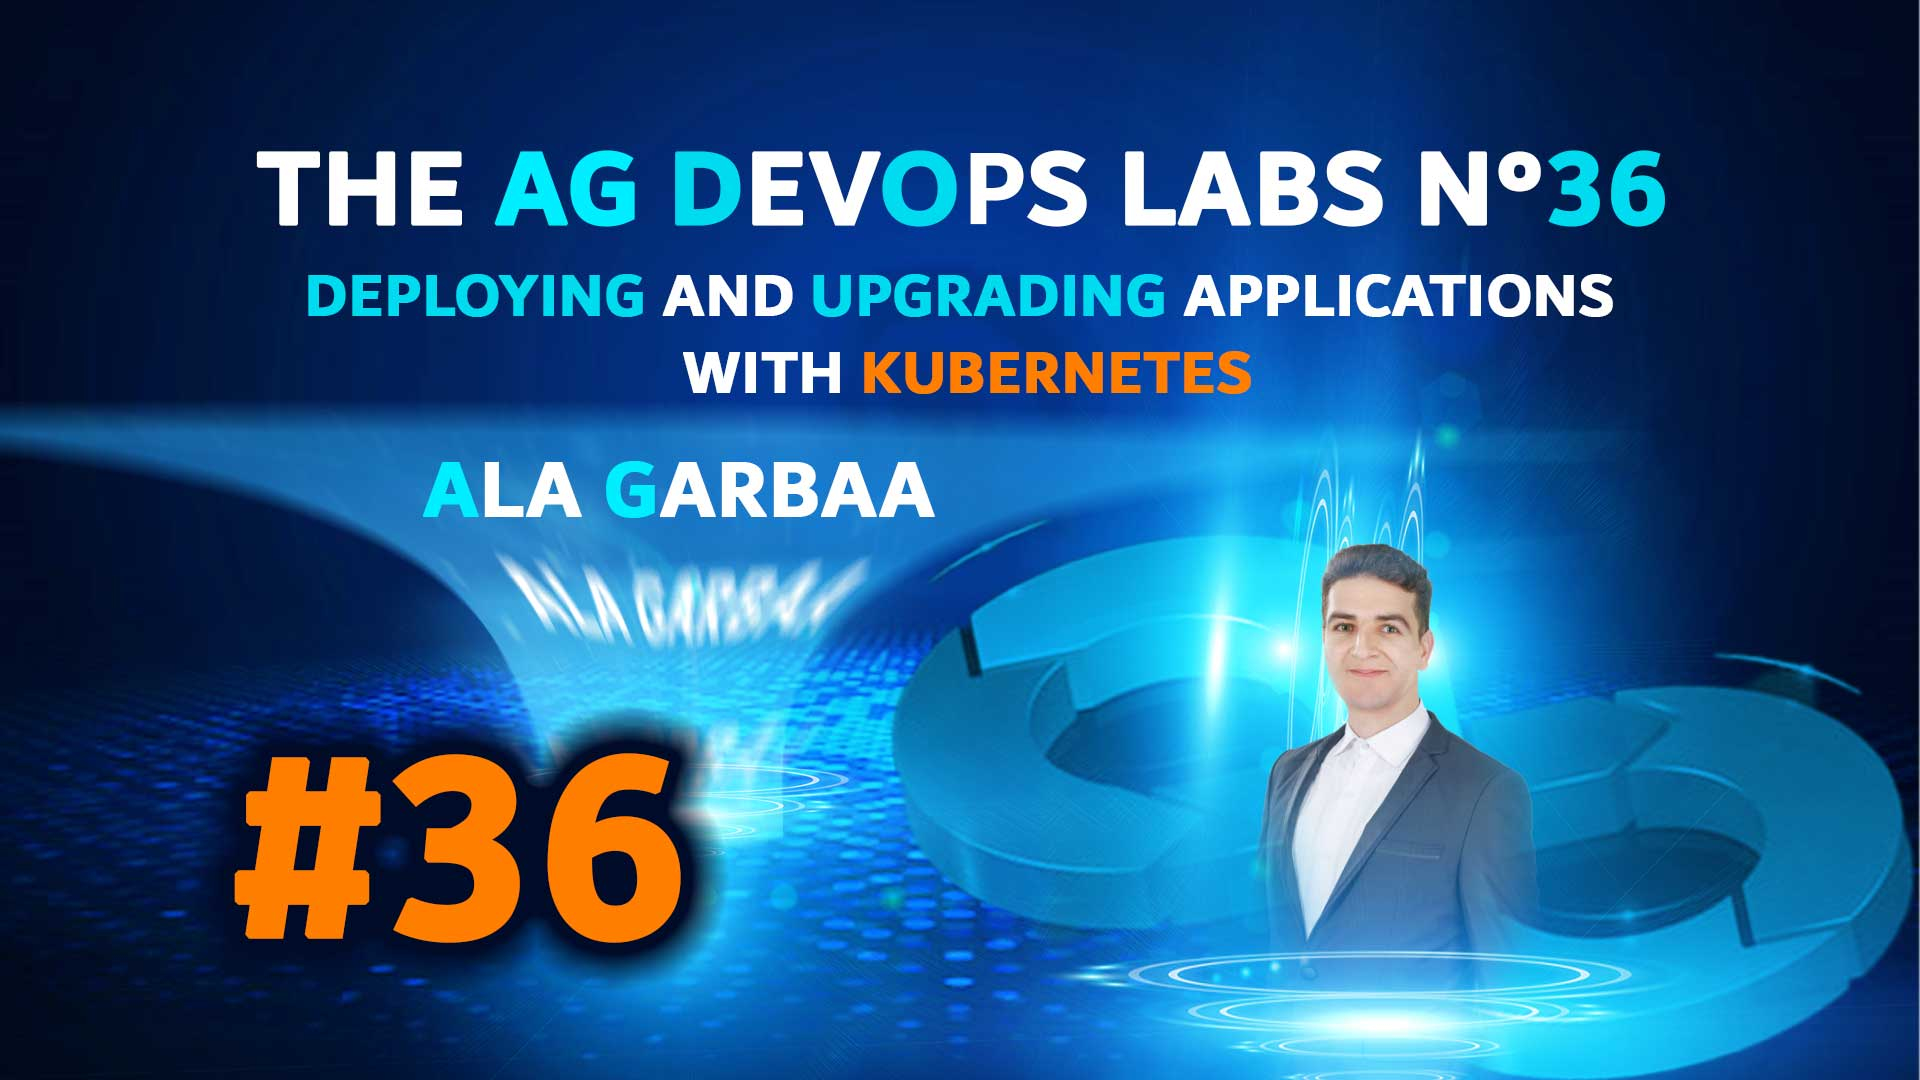 AG DevOps Labs #36: DevOps Labs: Deploying and Upgrading Applications with Kubernetes